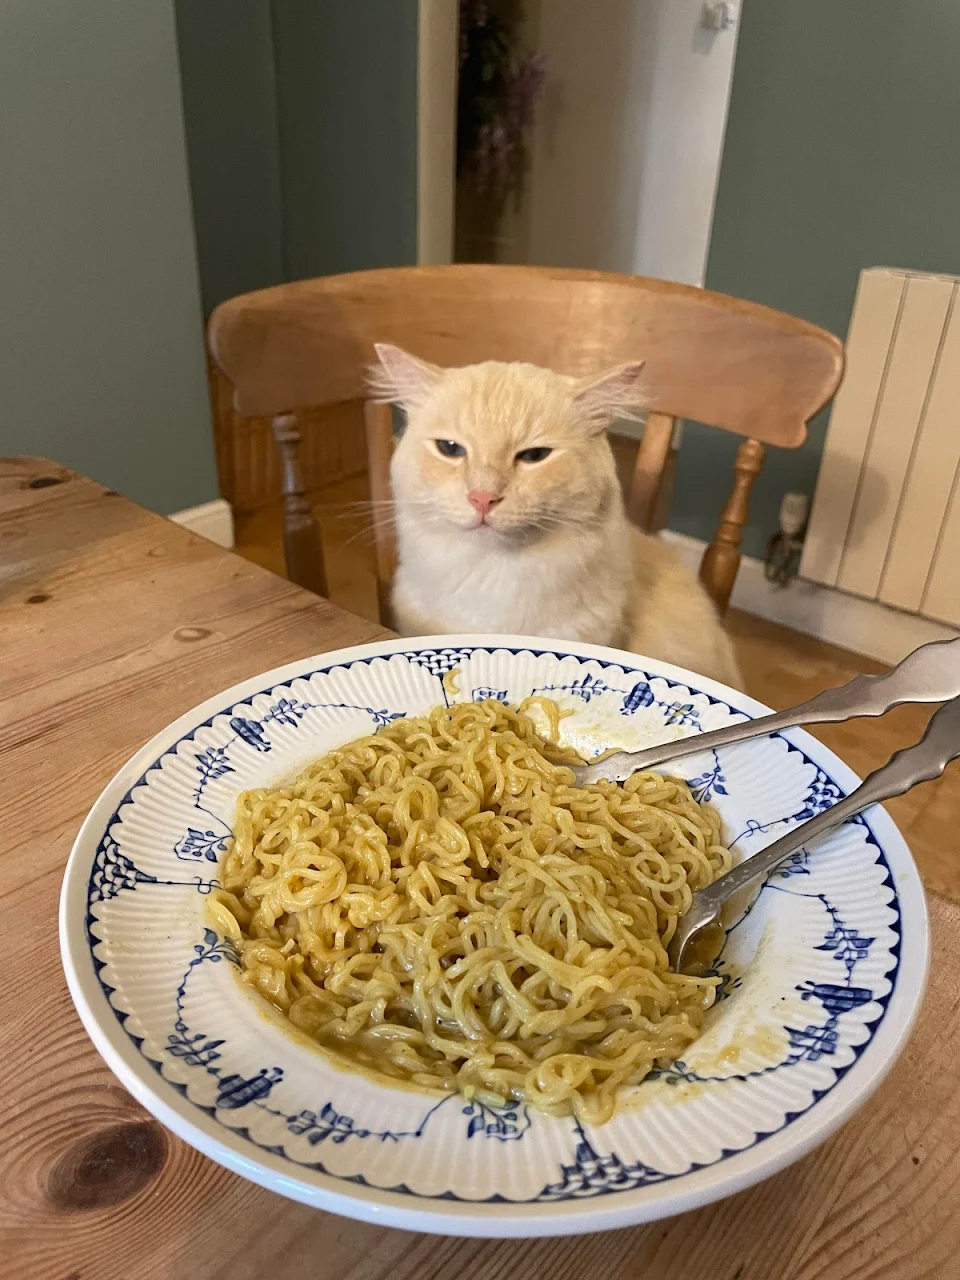 Can someone photoshop my cat please. His utter disgust at my Maggi noodles.